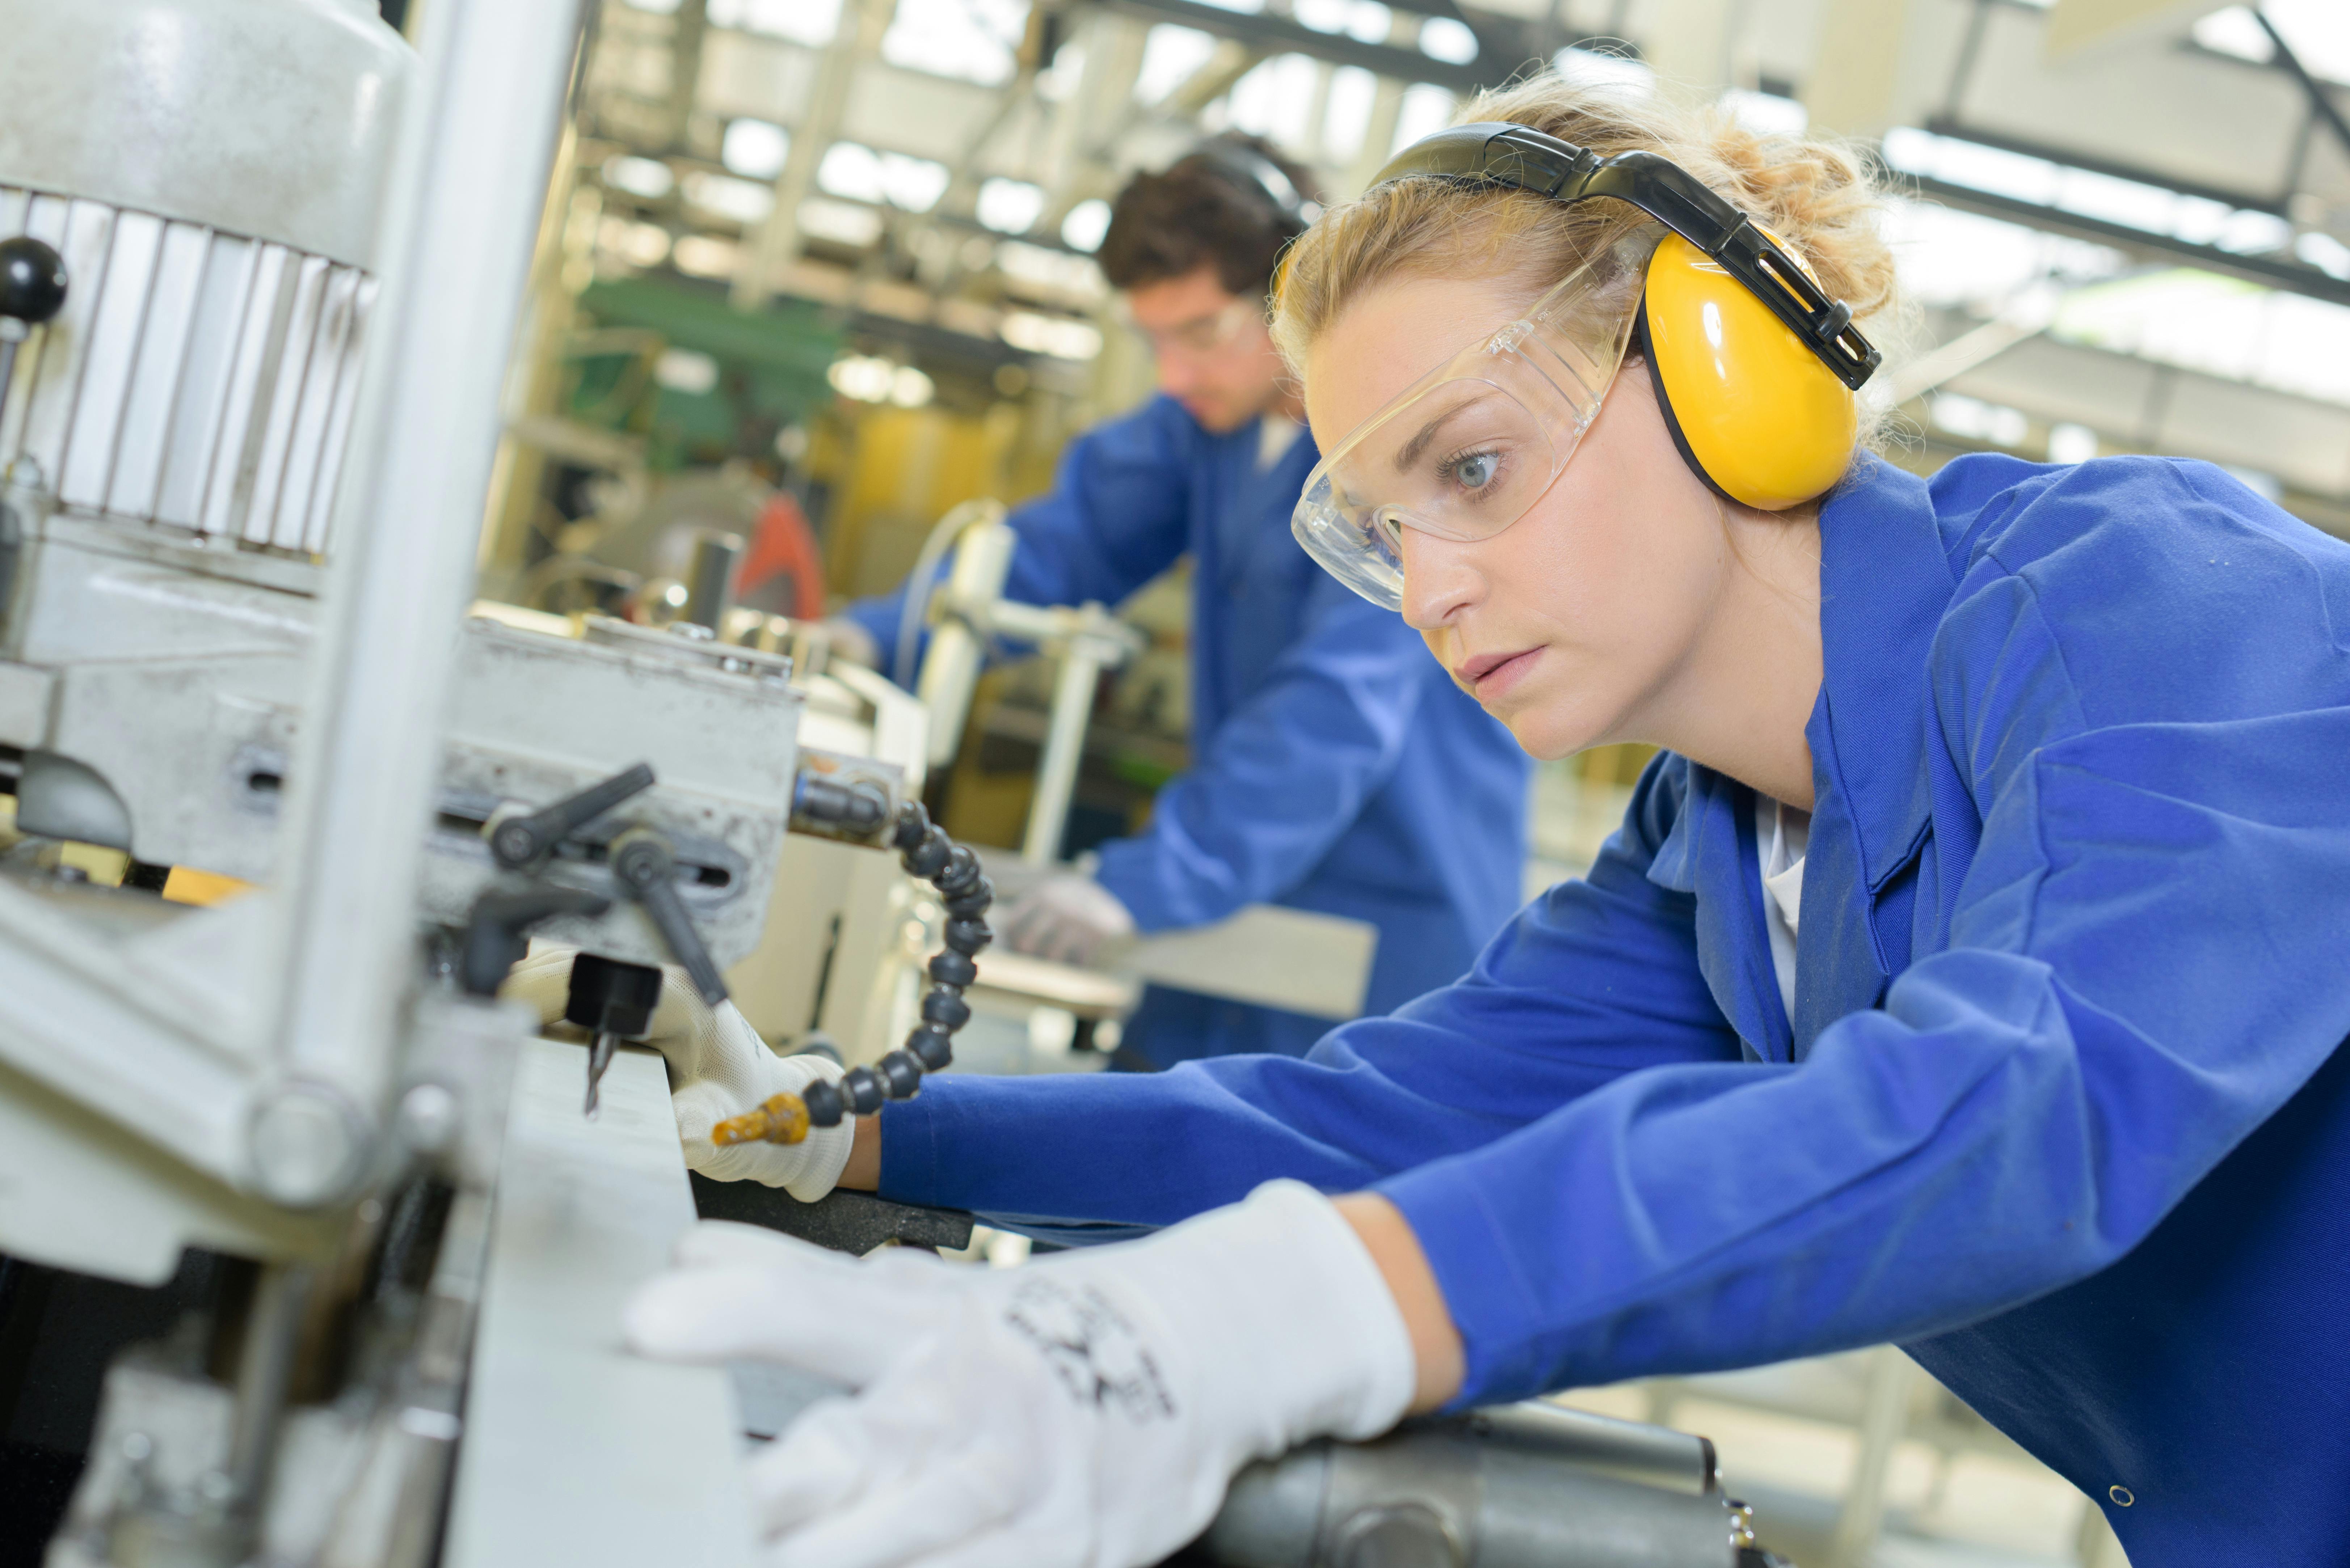 Improved workplace safety with hearing benefits represented by people working with machinery